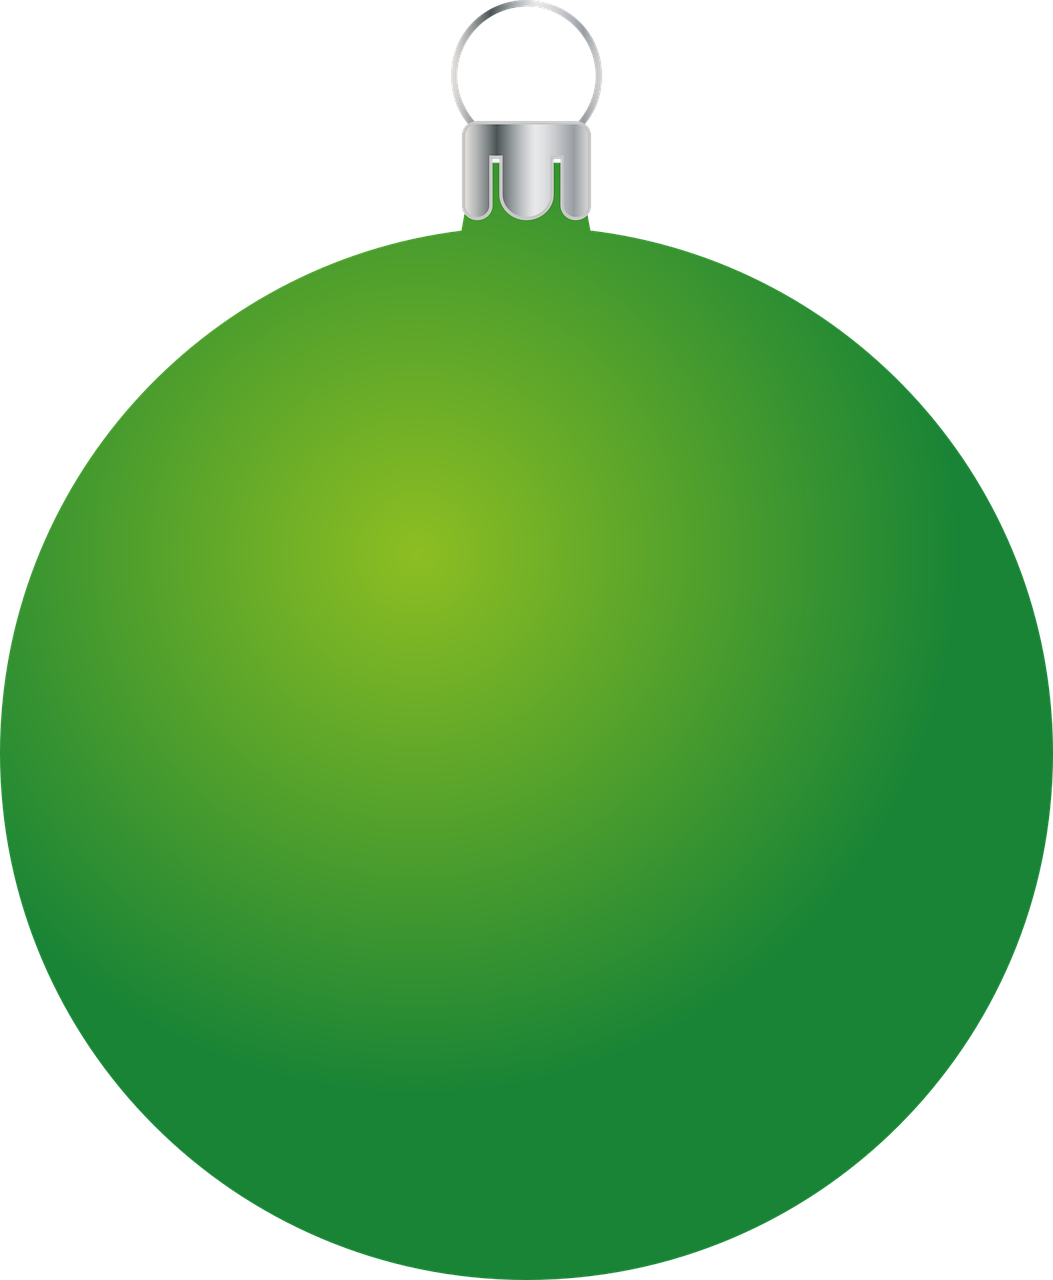 Download PNG image - Green Christmas Bauble PNG Clipart 